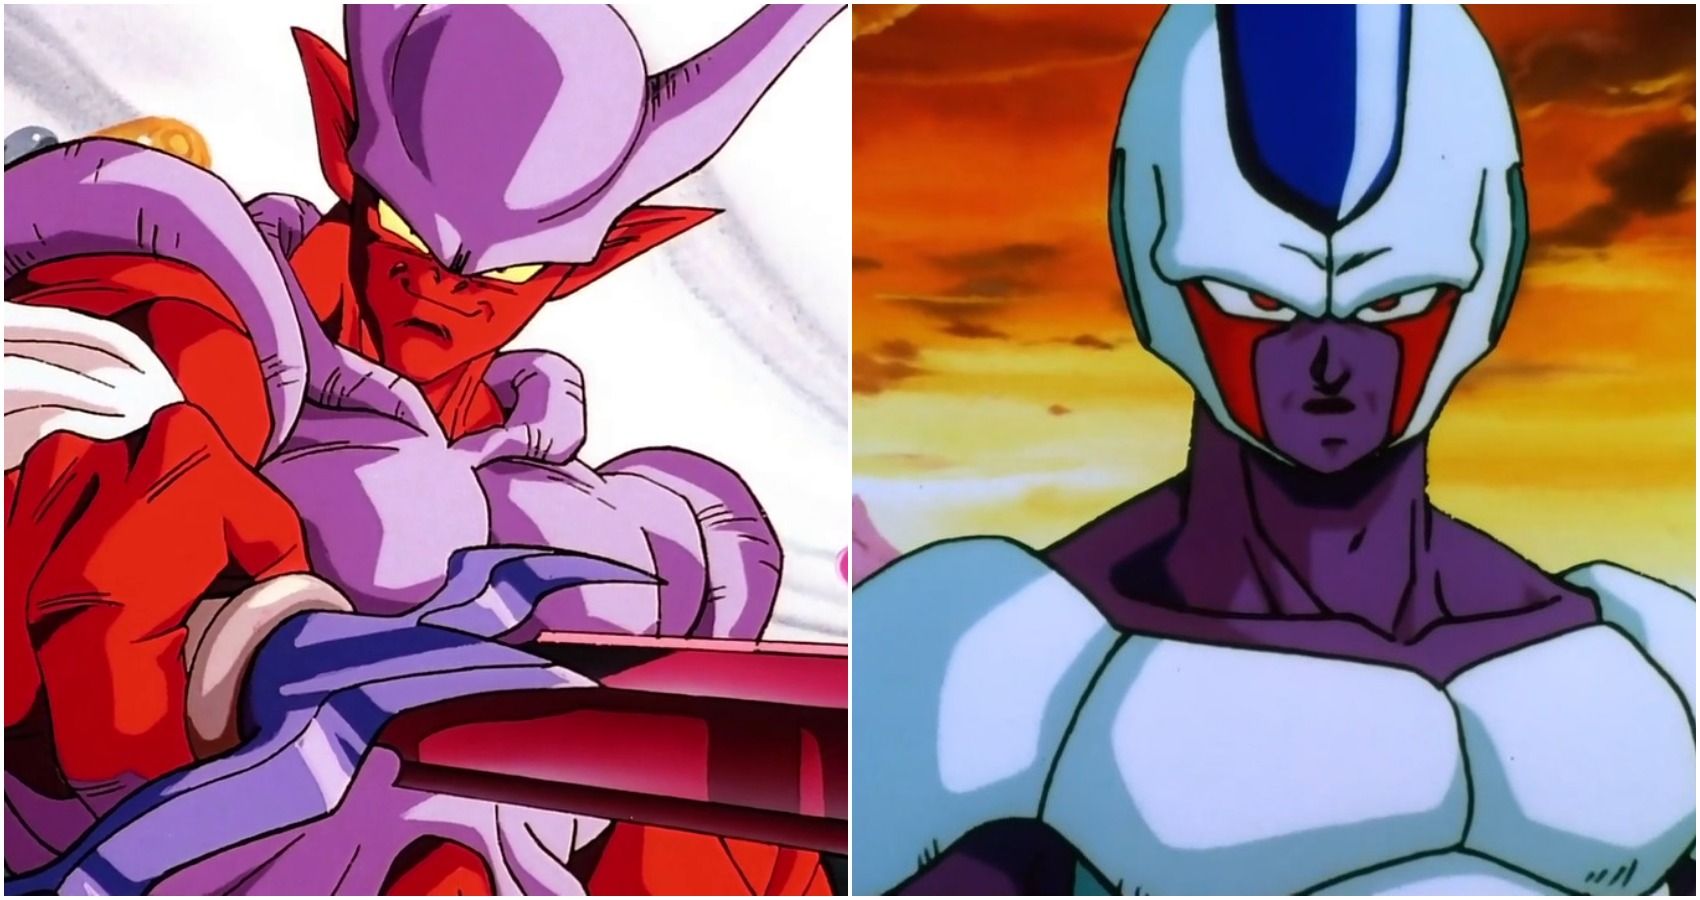 10 Characters From The Dragon Ball Z Movies That We Want to See in Dragon Ball Super